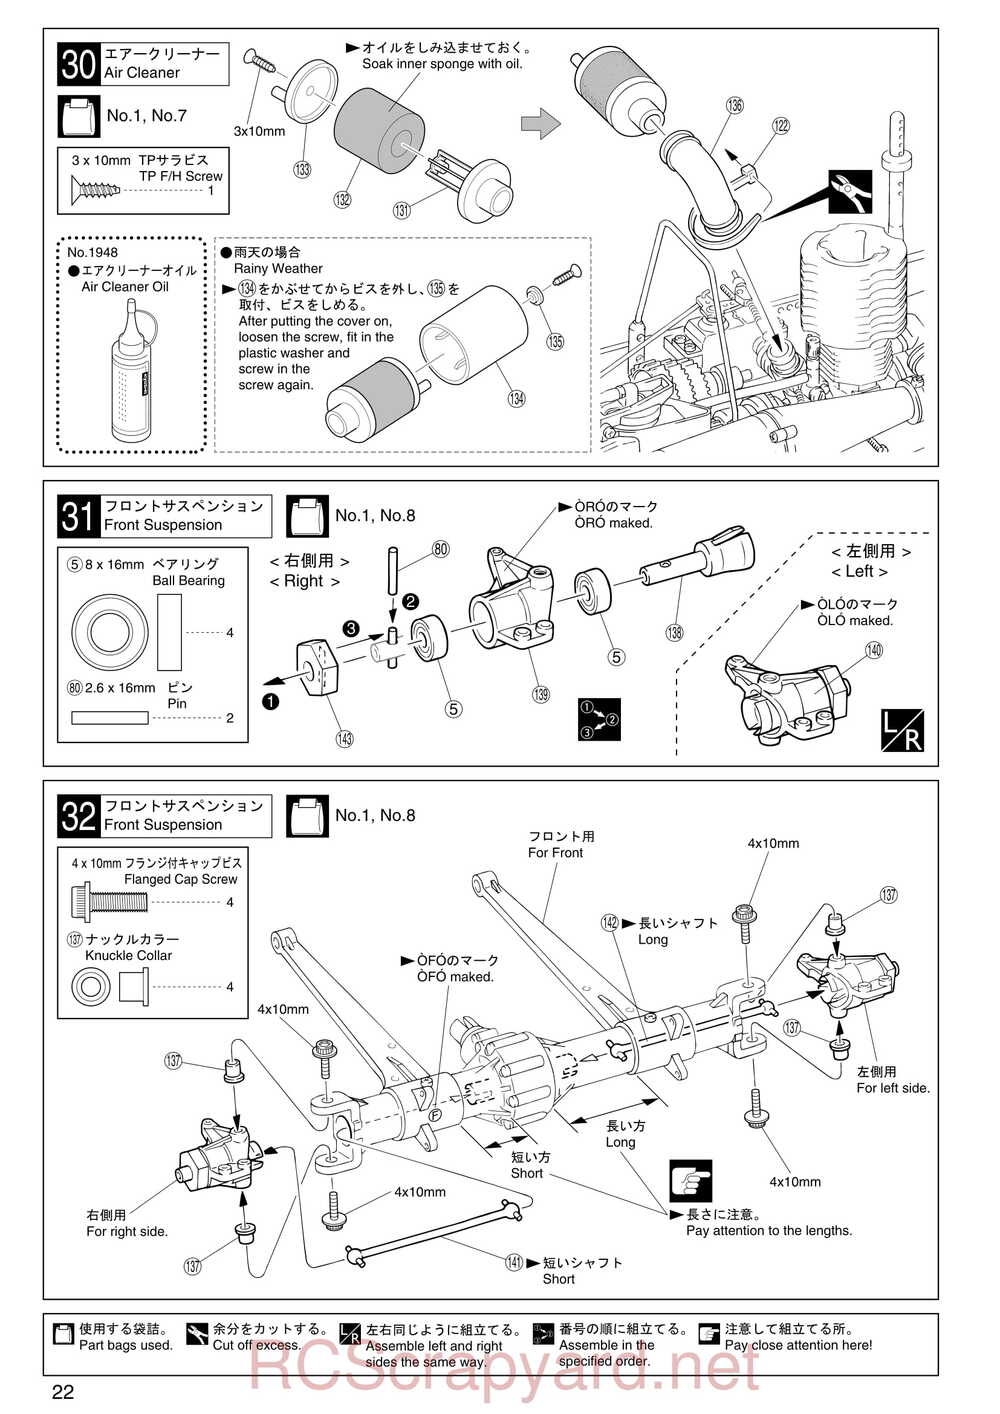 Kyosho - 31224 - Mad-Armour - Manual - Page 22